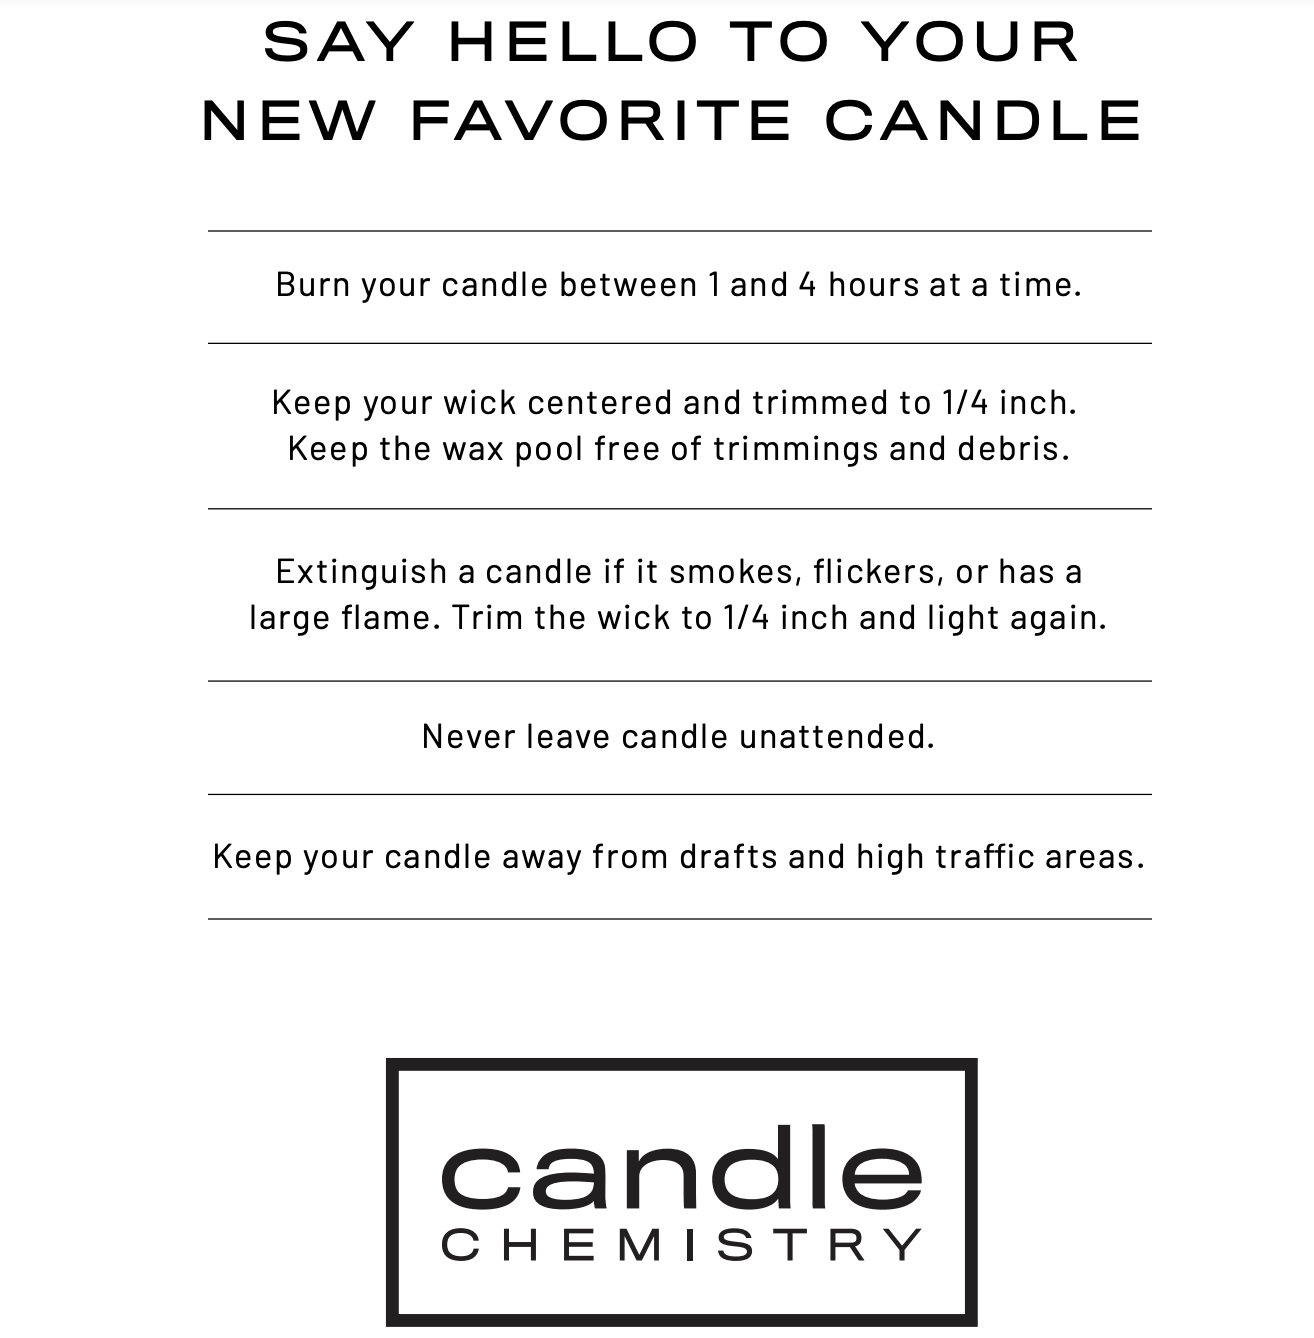 Image of candle with care card including say hello to your new favorite candle, burn your candle between 1 and 4 hours at a time, keep your wick centered adn trimmed to 1/4 inch. Keep the wax pool free of trimmings and debris. Extinguish a candle if it smokes, flickers, or has a large flame. Trim the wick to 1/4 inch and light again. Never leave candle unattended. Keep your candle away from drafts and high traffic areas. Find us in arizona at Scottdale Quarter, Park west peoria, or downtown gilbert. email invent@candlechemistry.com